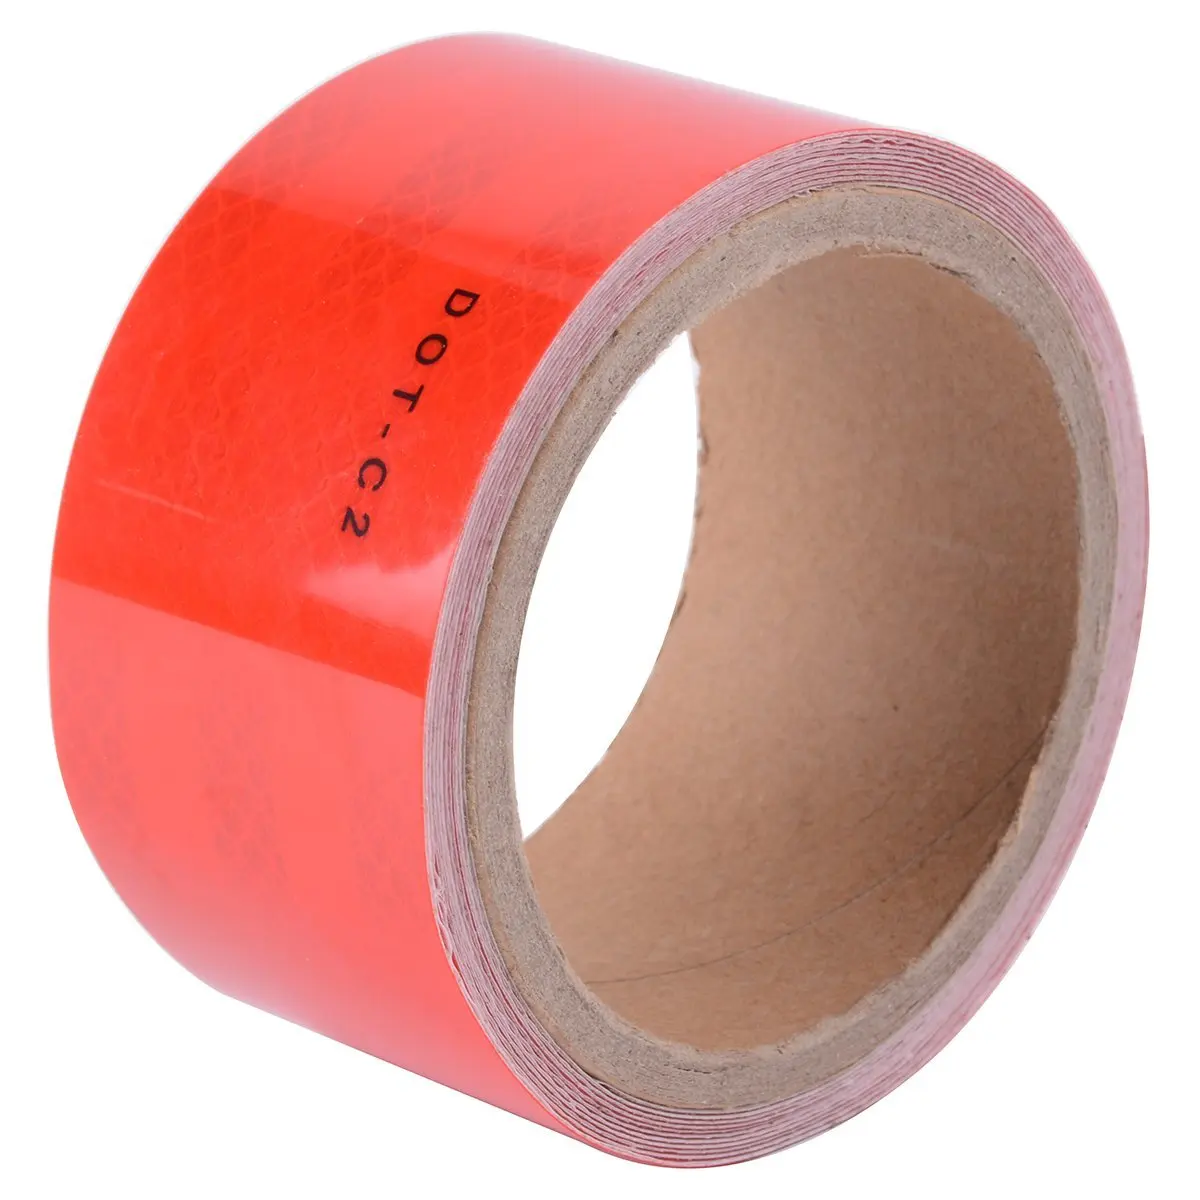 2"x150' Dot-C2 PREMIUM Reflective Red and White Conspicuity Tape Trailer 1 Roll~